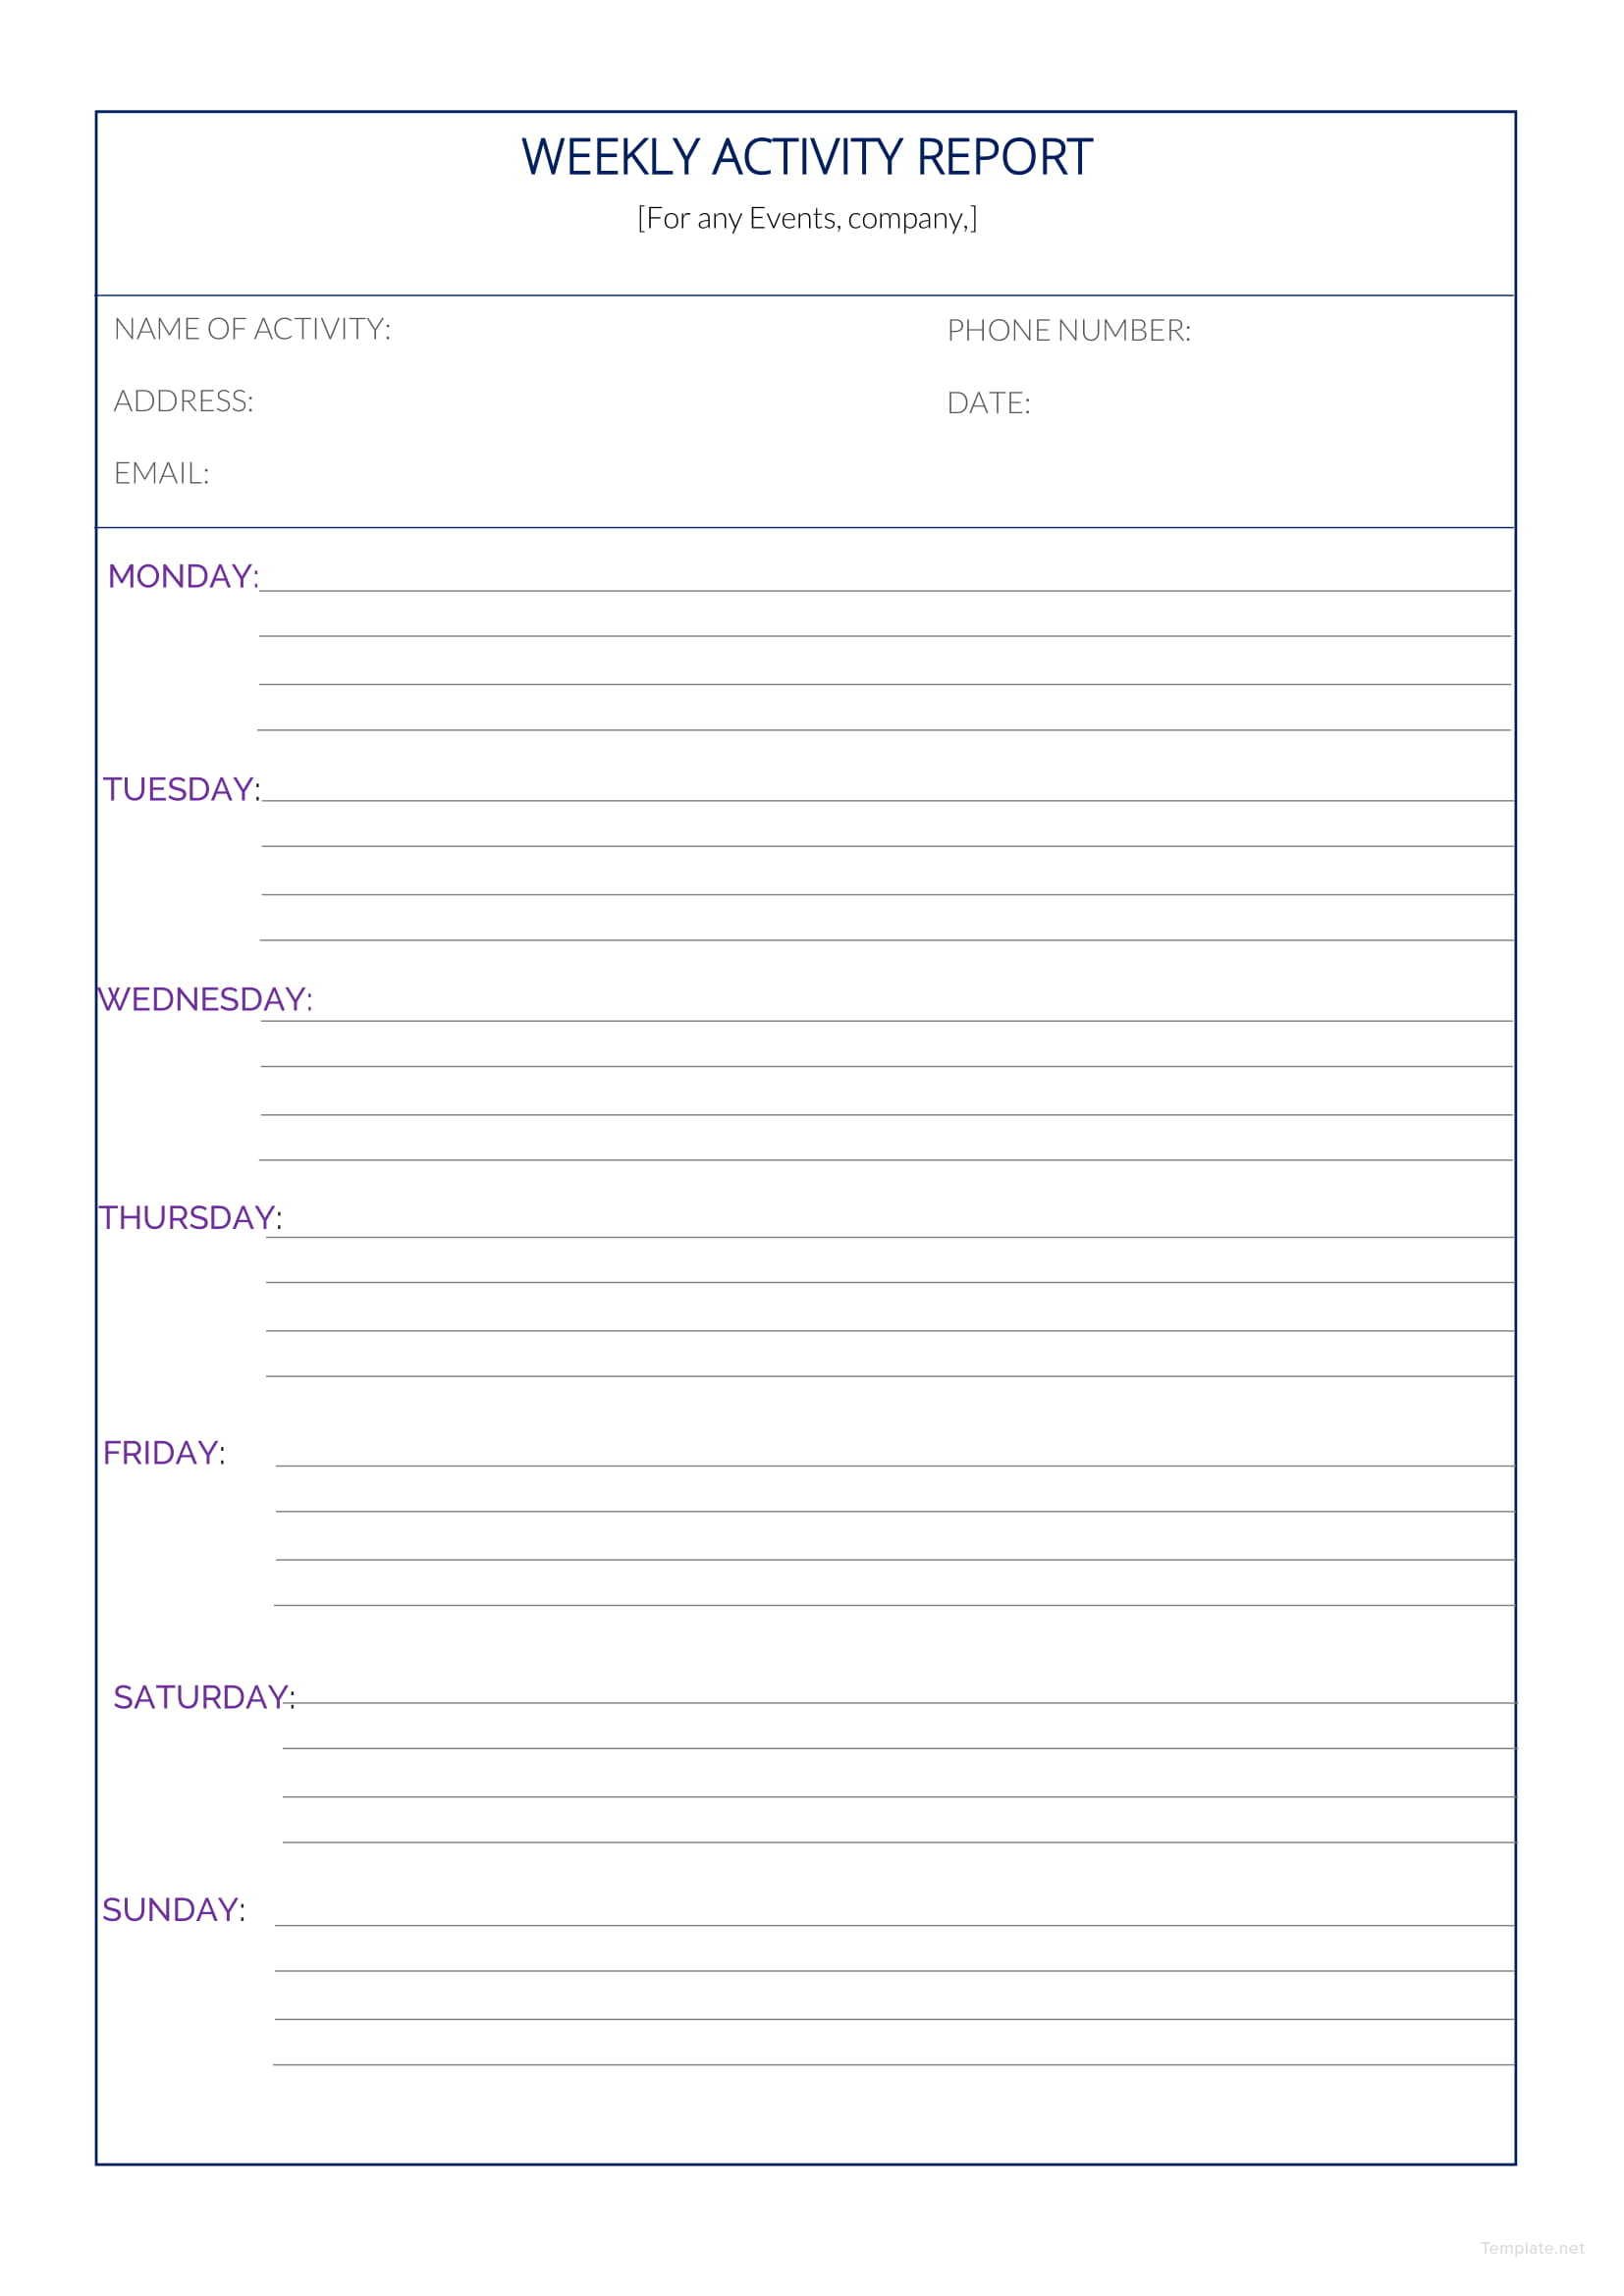 Daily Activity Report Format